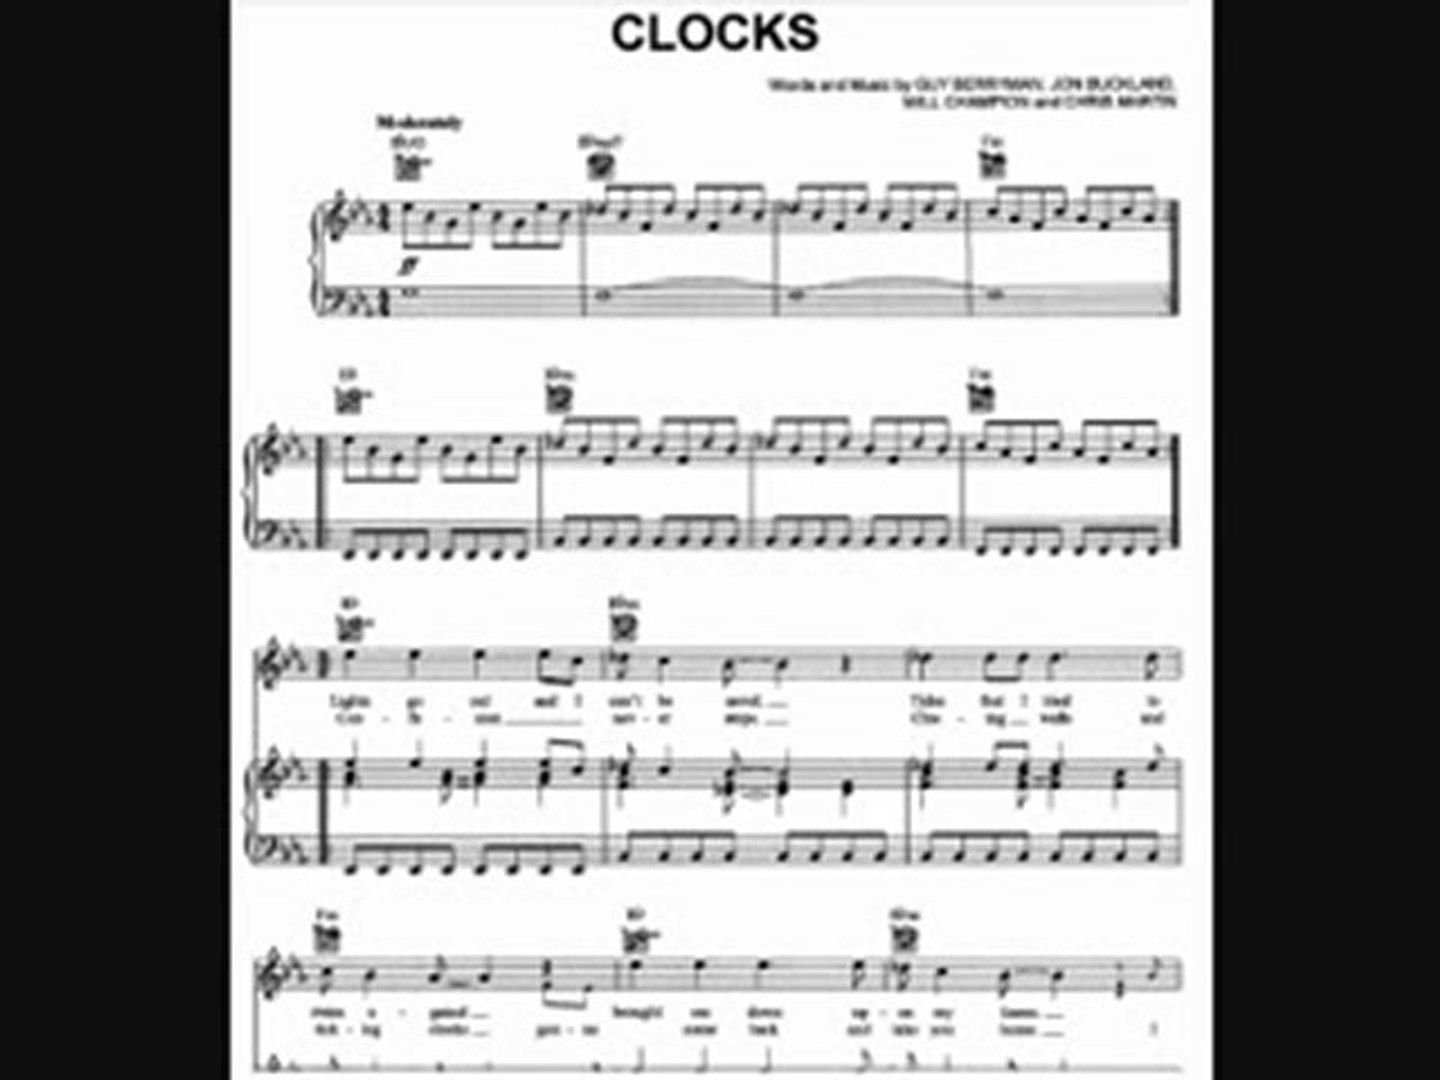 30+ Clocks Piano Sheet Music Pictures